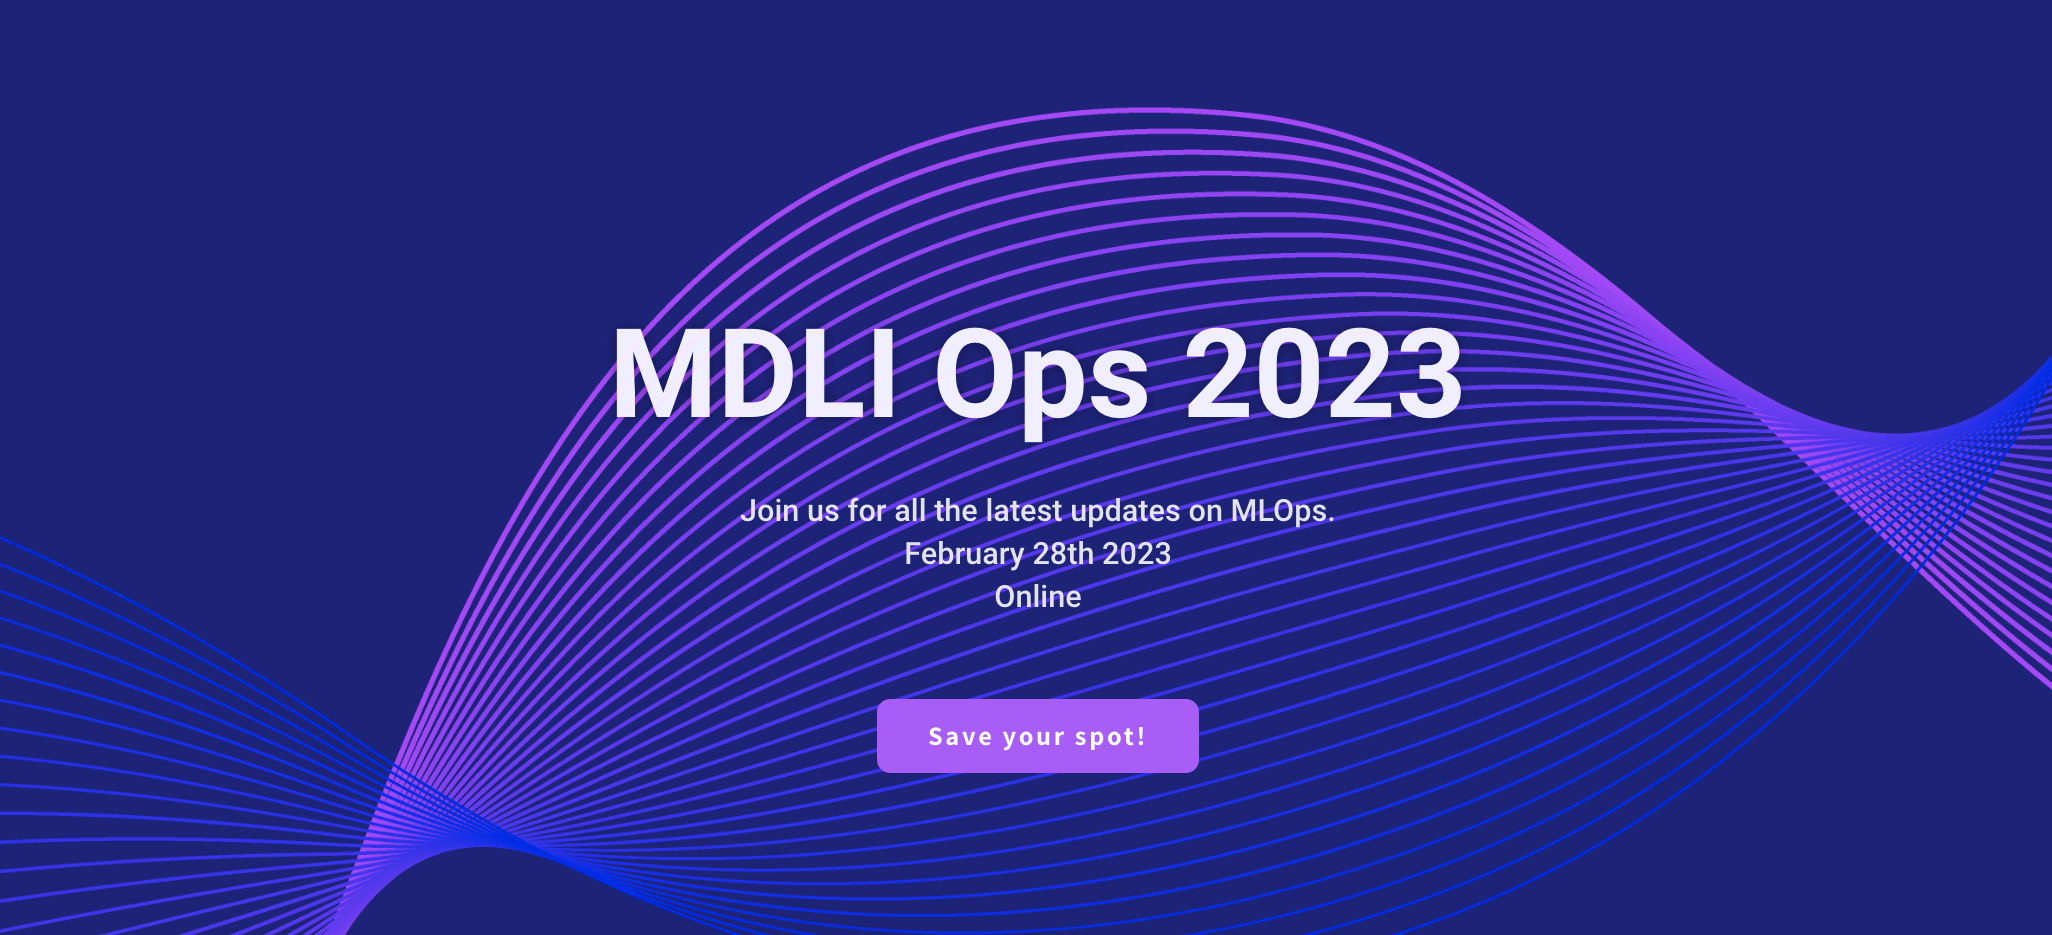 MDLI Ops Conference 2023